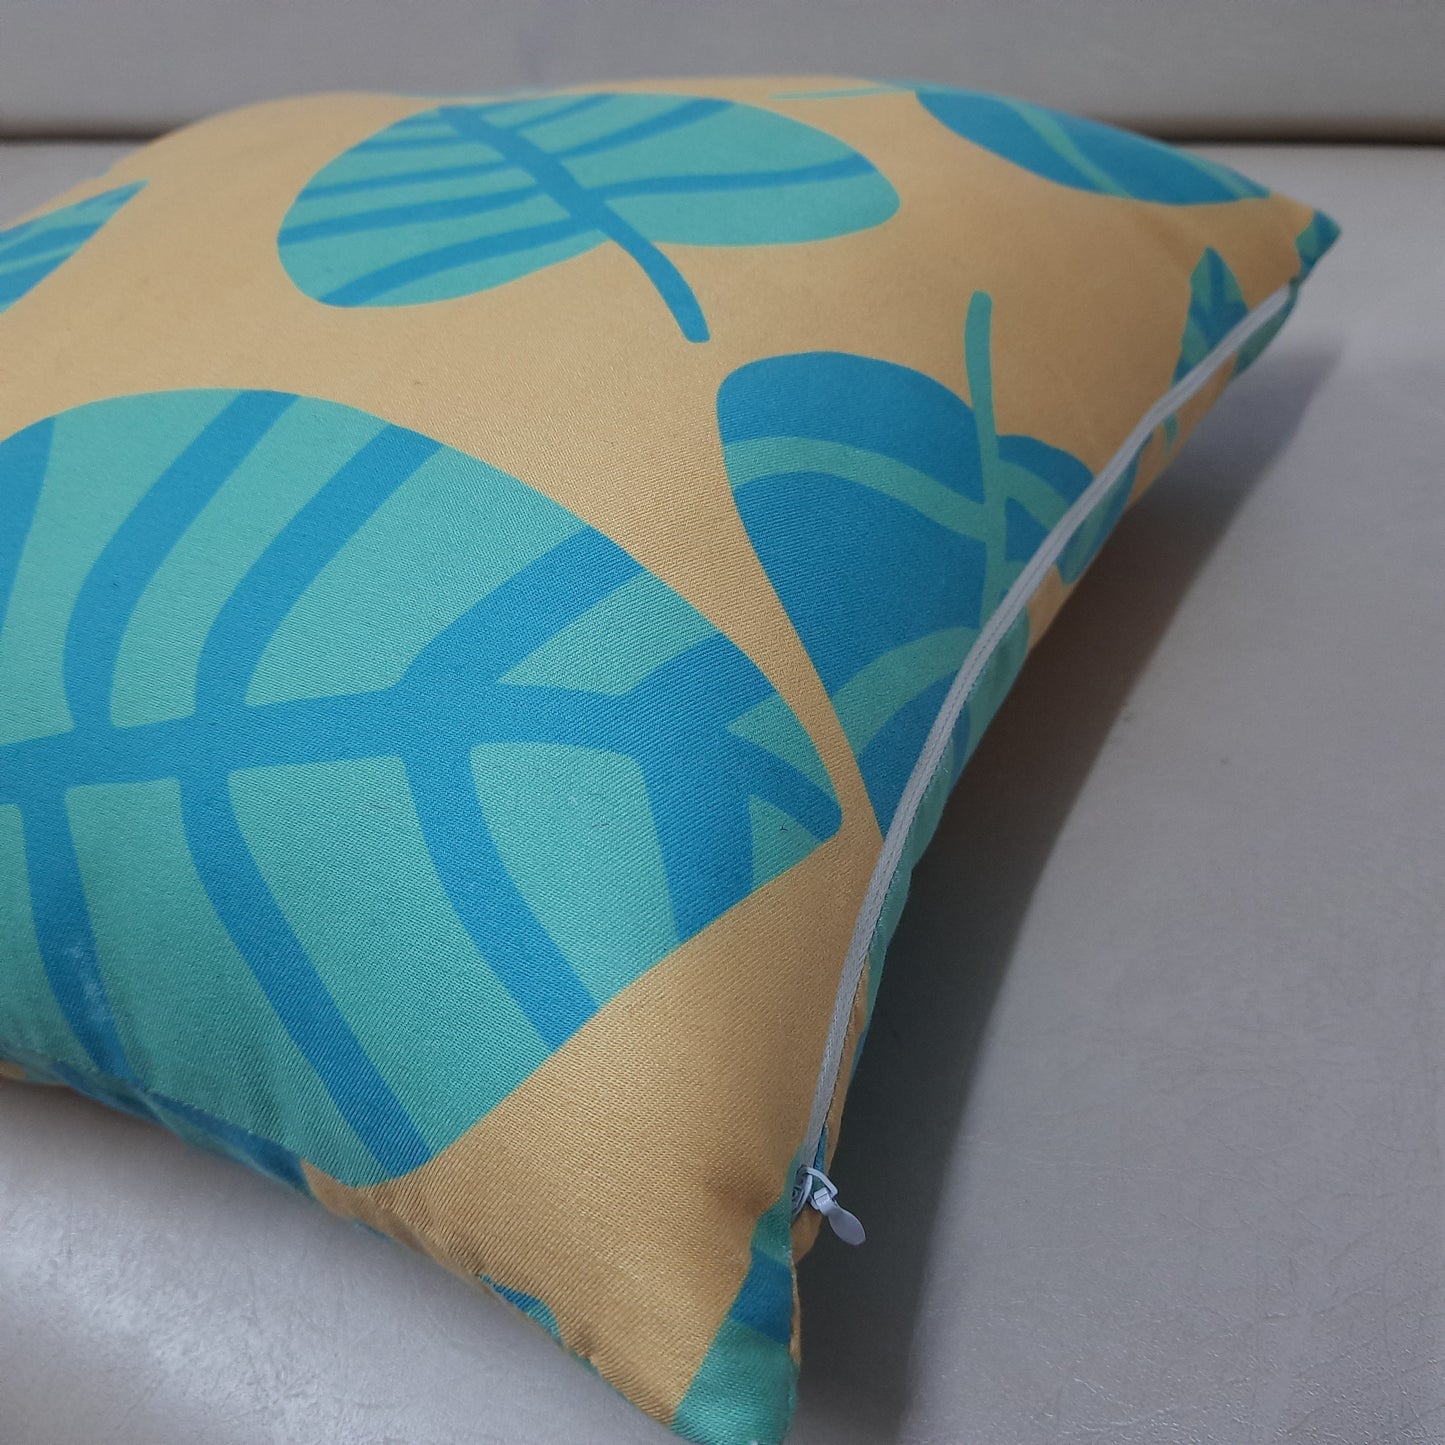 Riviera Collection-Cushion Covers In Glace Cotton For Regular Use –Yellow With leaves – Best Price 40cm x 40cm (~16″ x 16″) – Set of 5